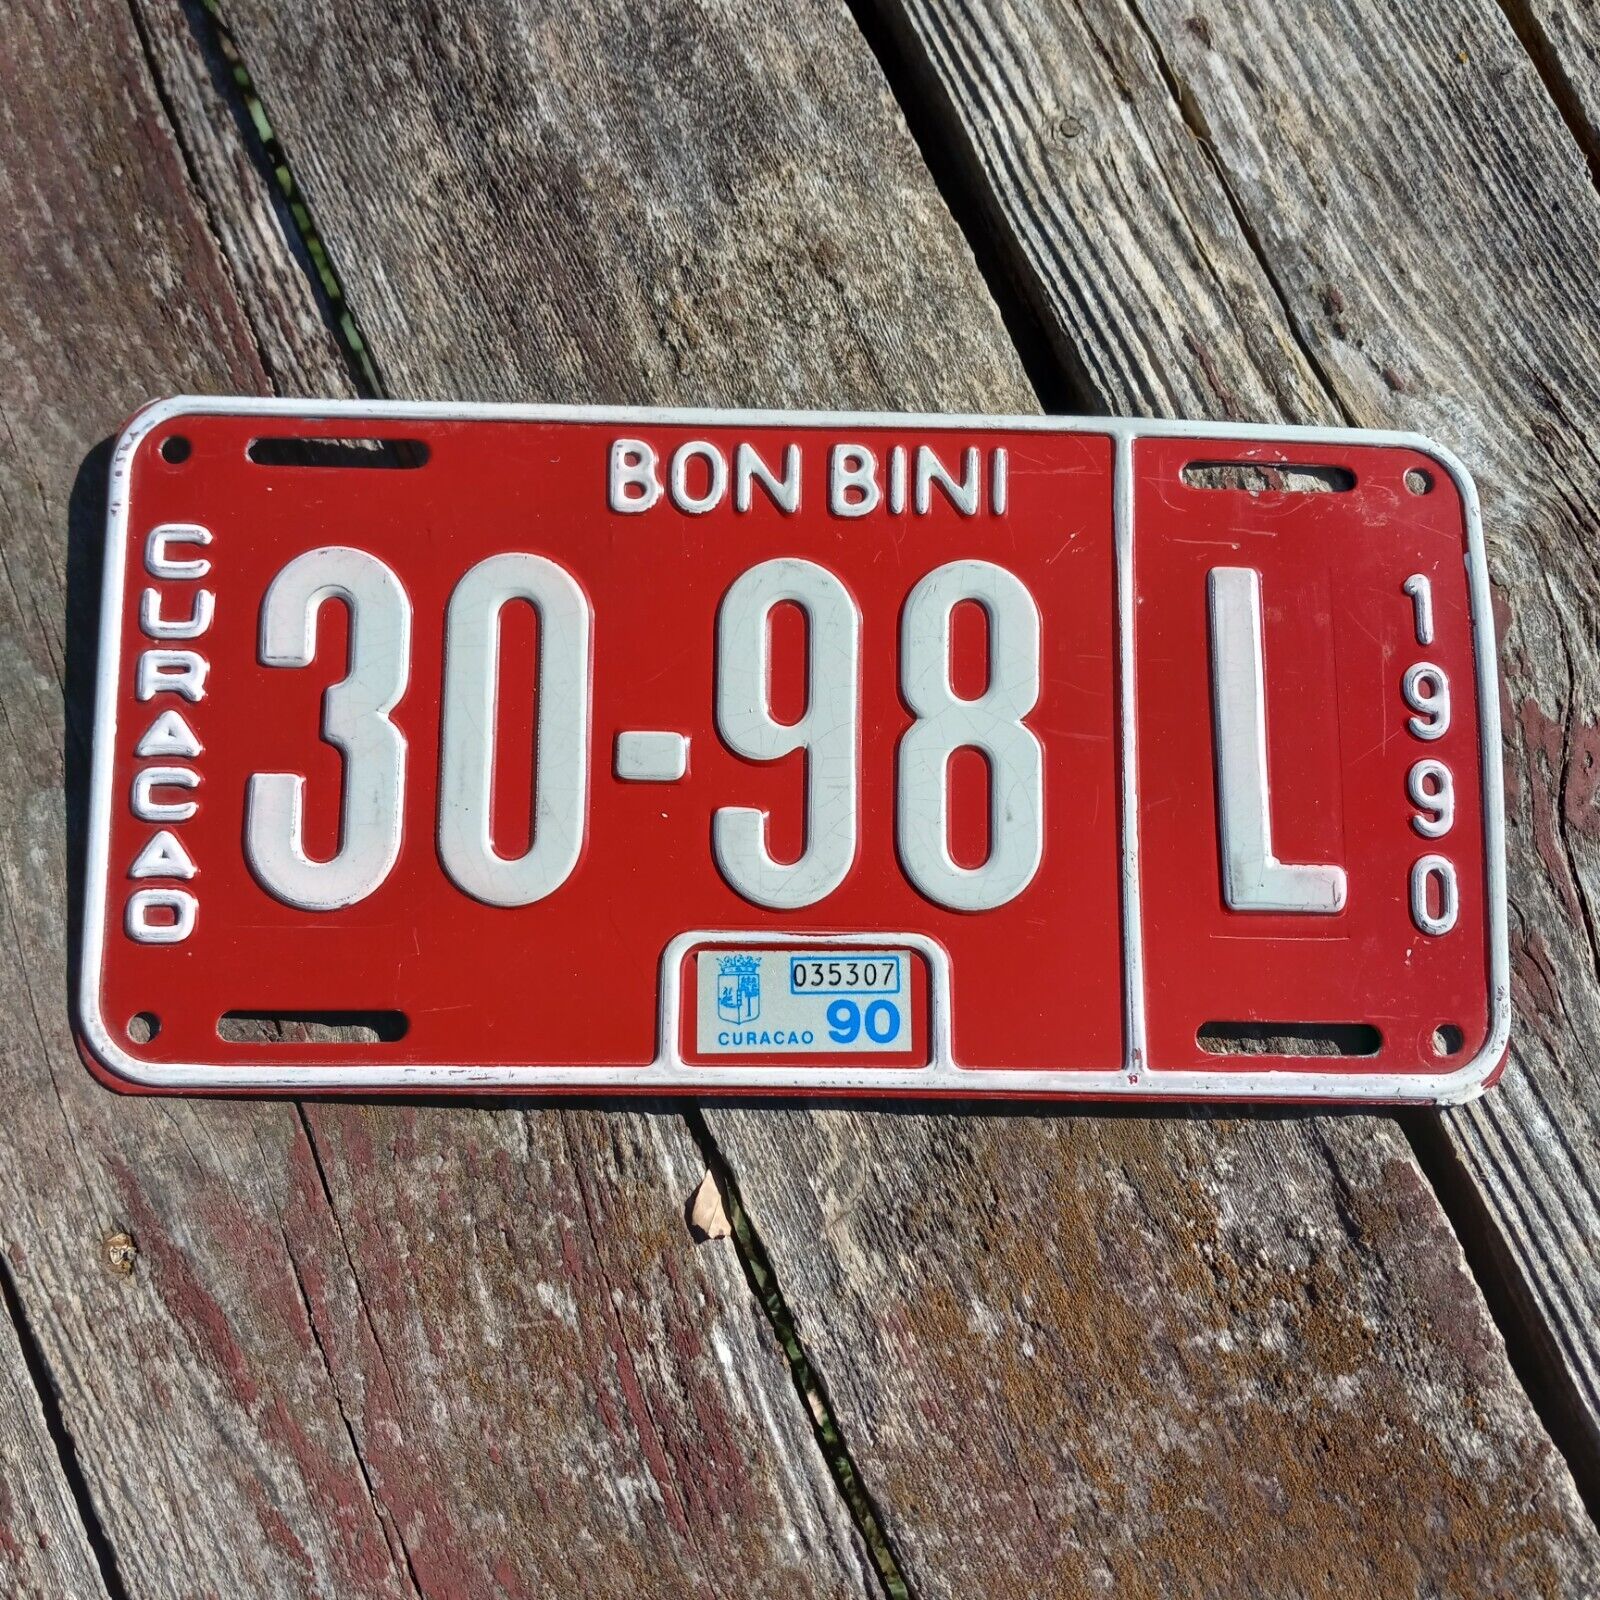 1990 Curacao License Plate - \